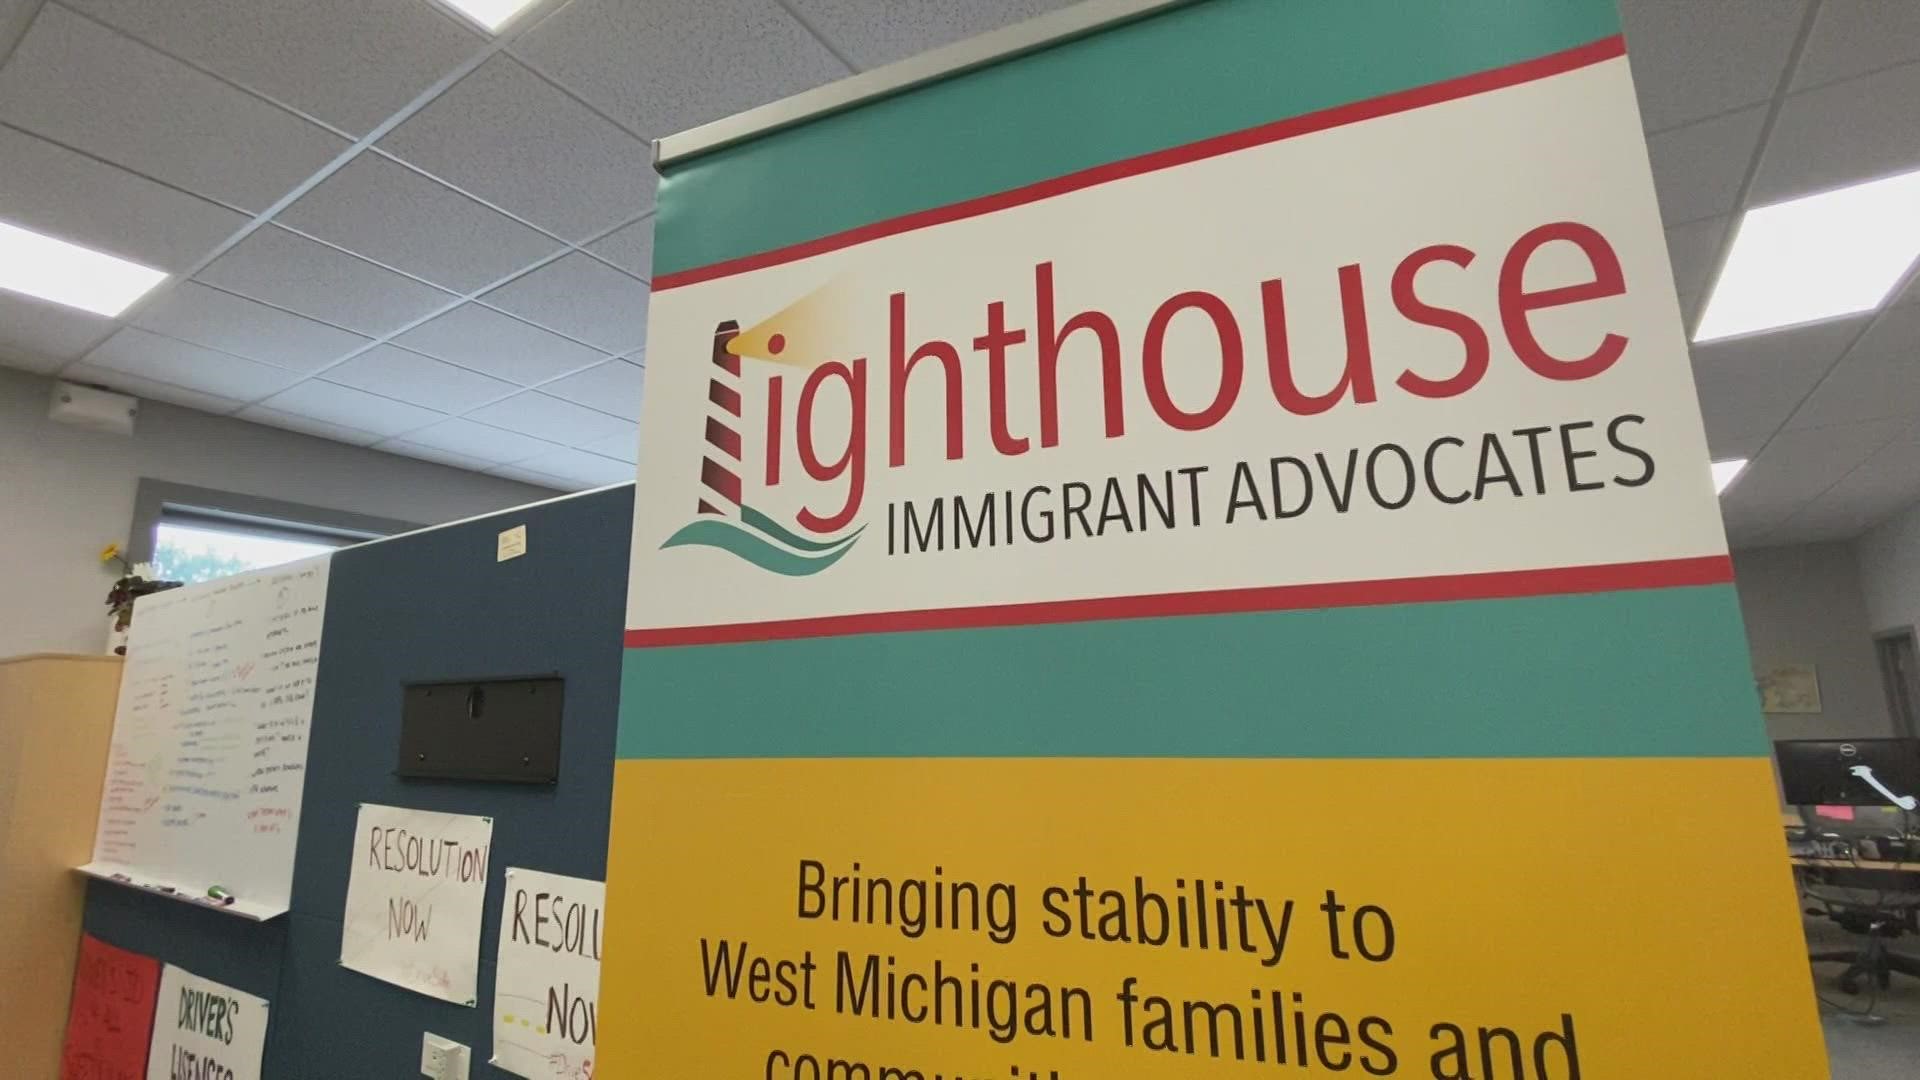 The clock is ticking for Afghan refugees who must apply for asylum within 1 year, and nearly 300 are set to start a new life in West Michigan.